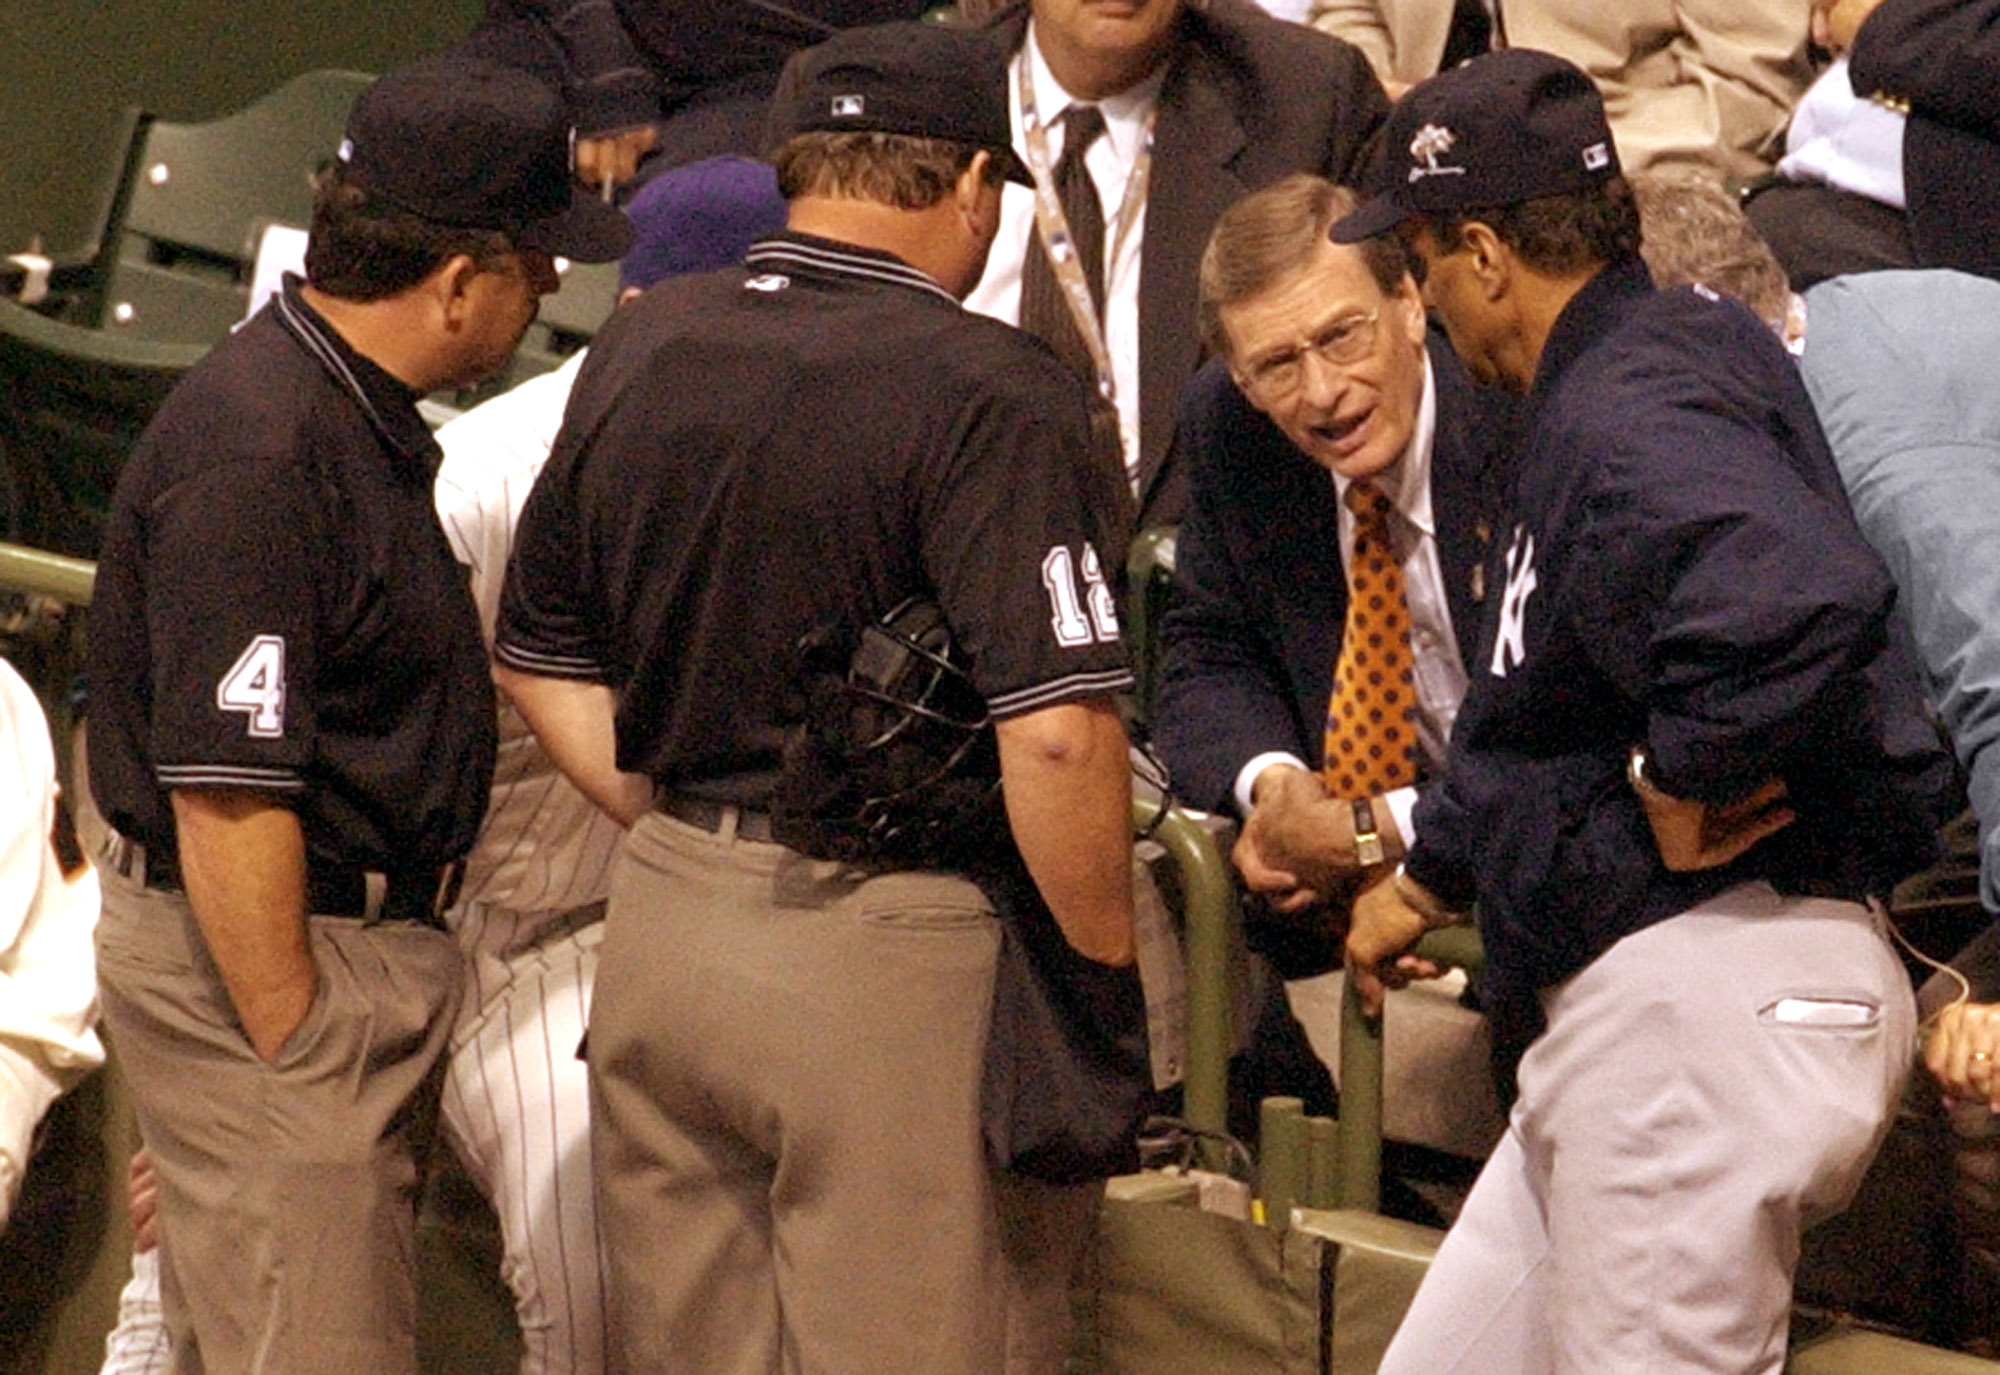 Baseball Commisioner Bud Selig, second from right, talks with American League manager Joe Torre, right, and National League manager Bob Brenly, hidden, as umpires listen during the 11th inning of the All-Star Game in Milwaukee, Tuesday, July 9, 2002. The game was called at the end of the inning with the score tied at 7-7. (AP Photo/Darren Hauck)